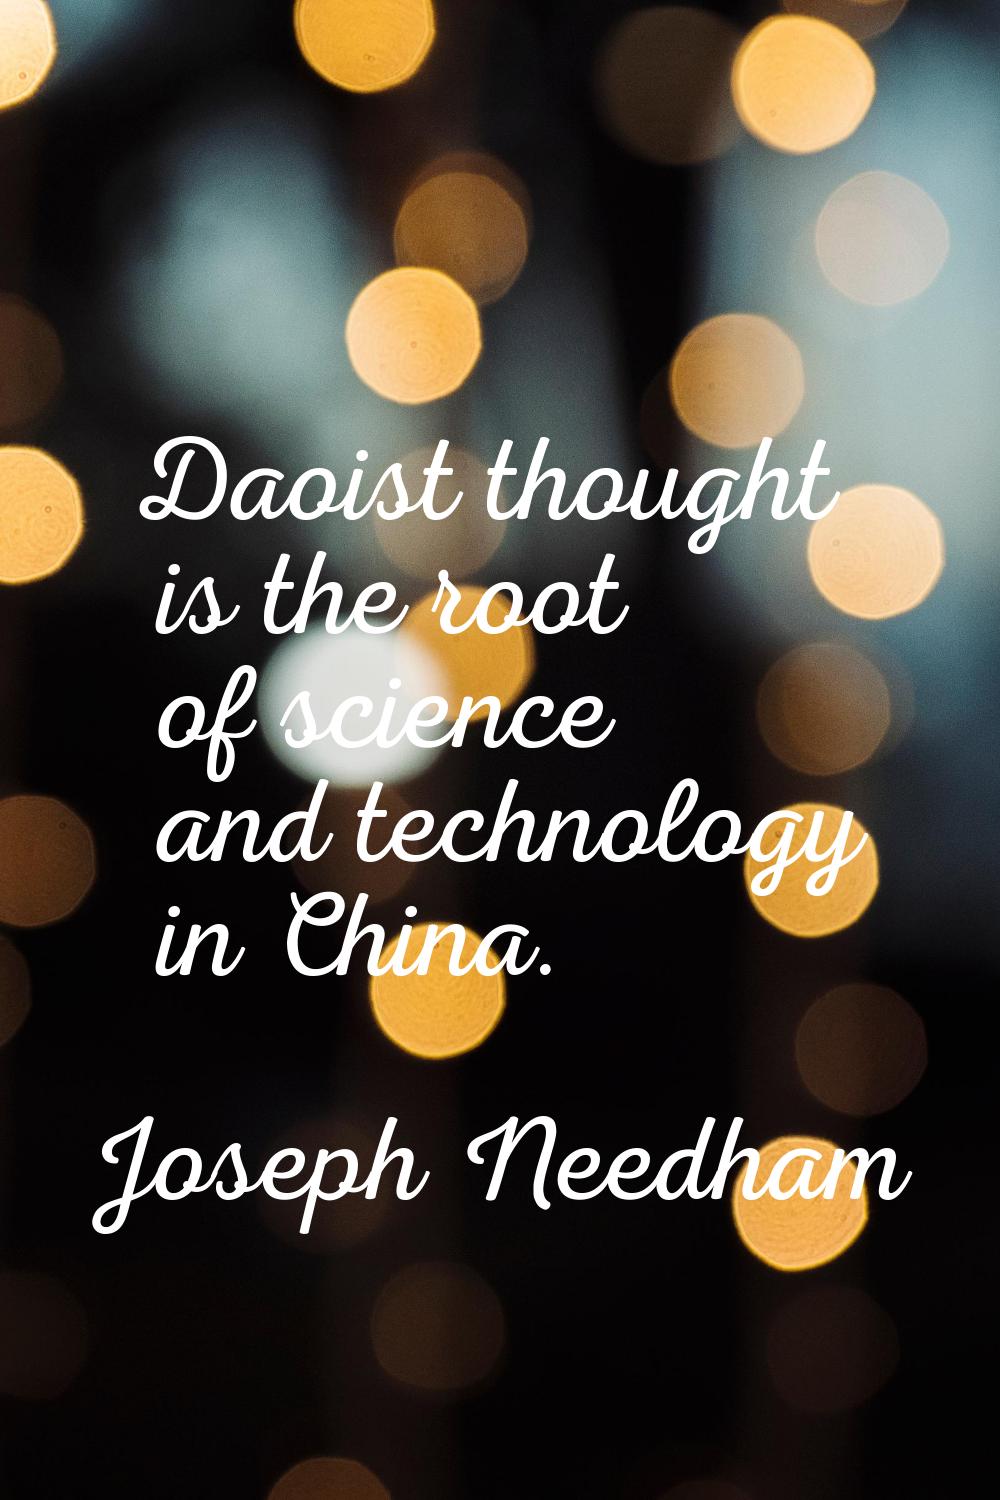 Daoist thought is the root of science and technology in China.